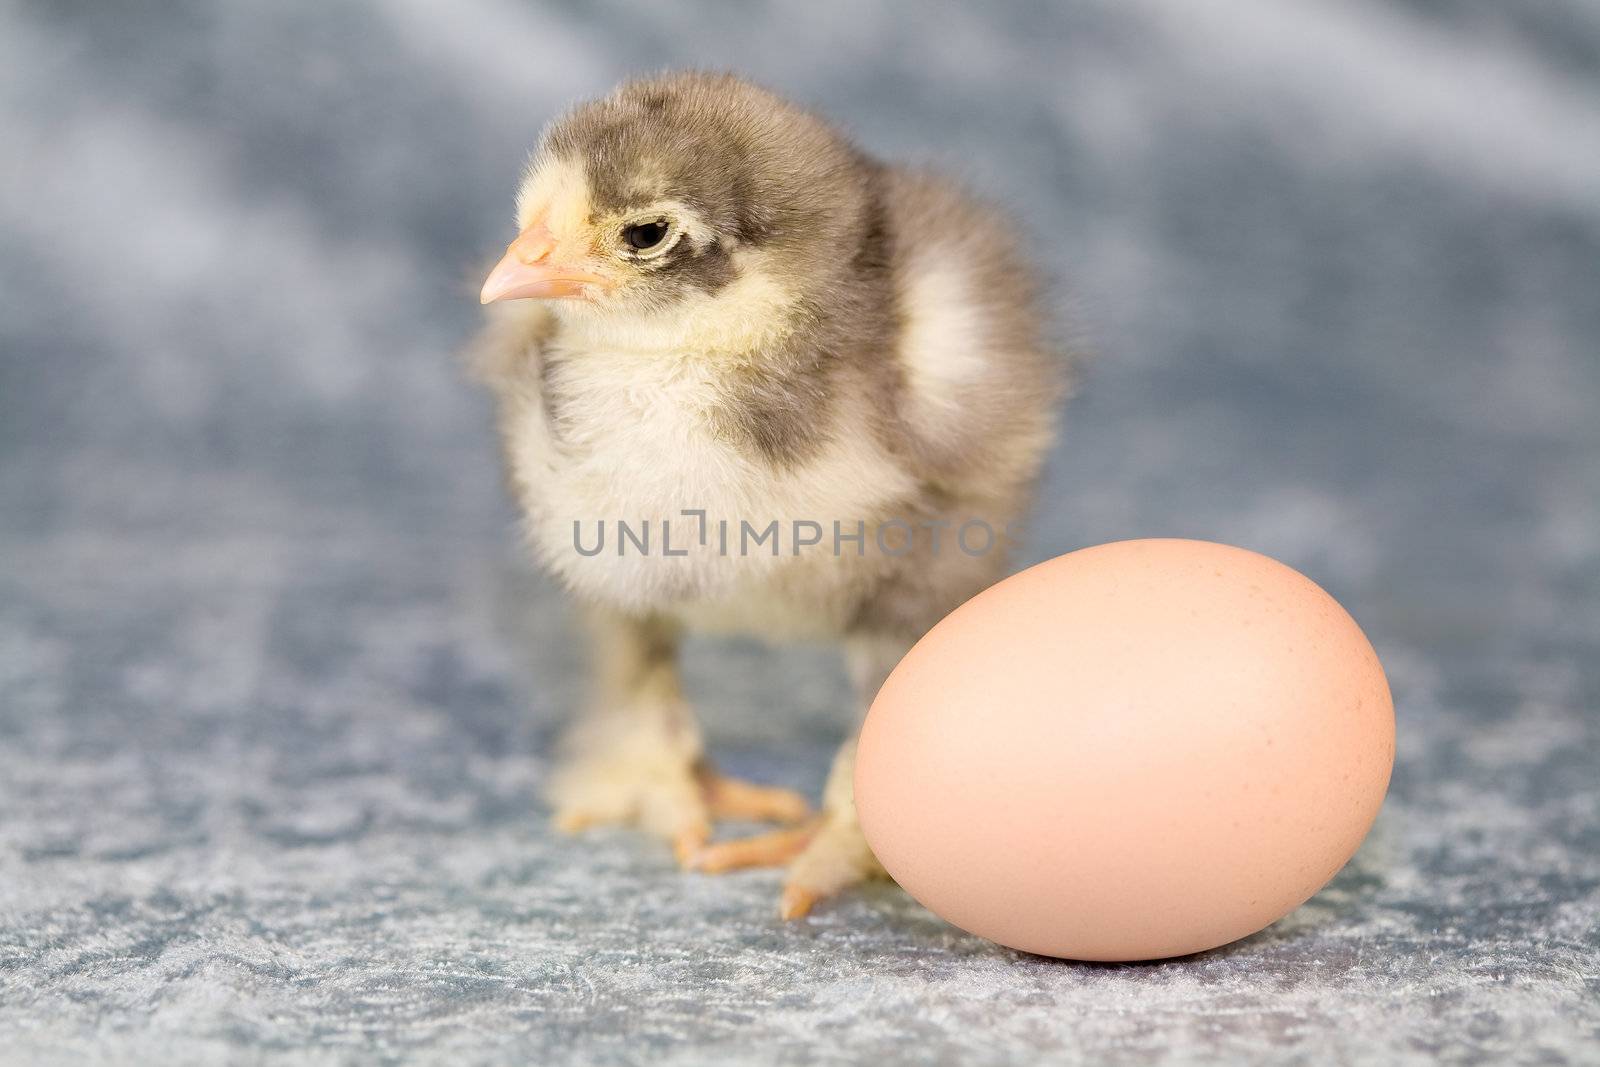 Cute blue brahma chicken with the egg it originally came from. Chicken is 5 days old